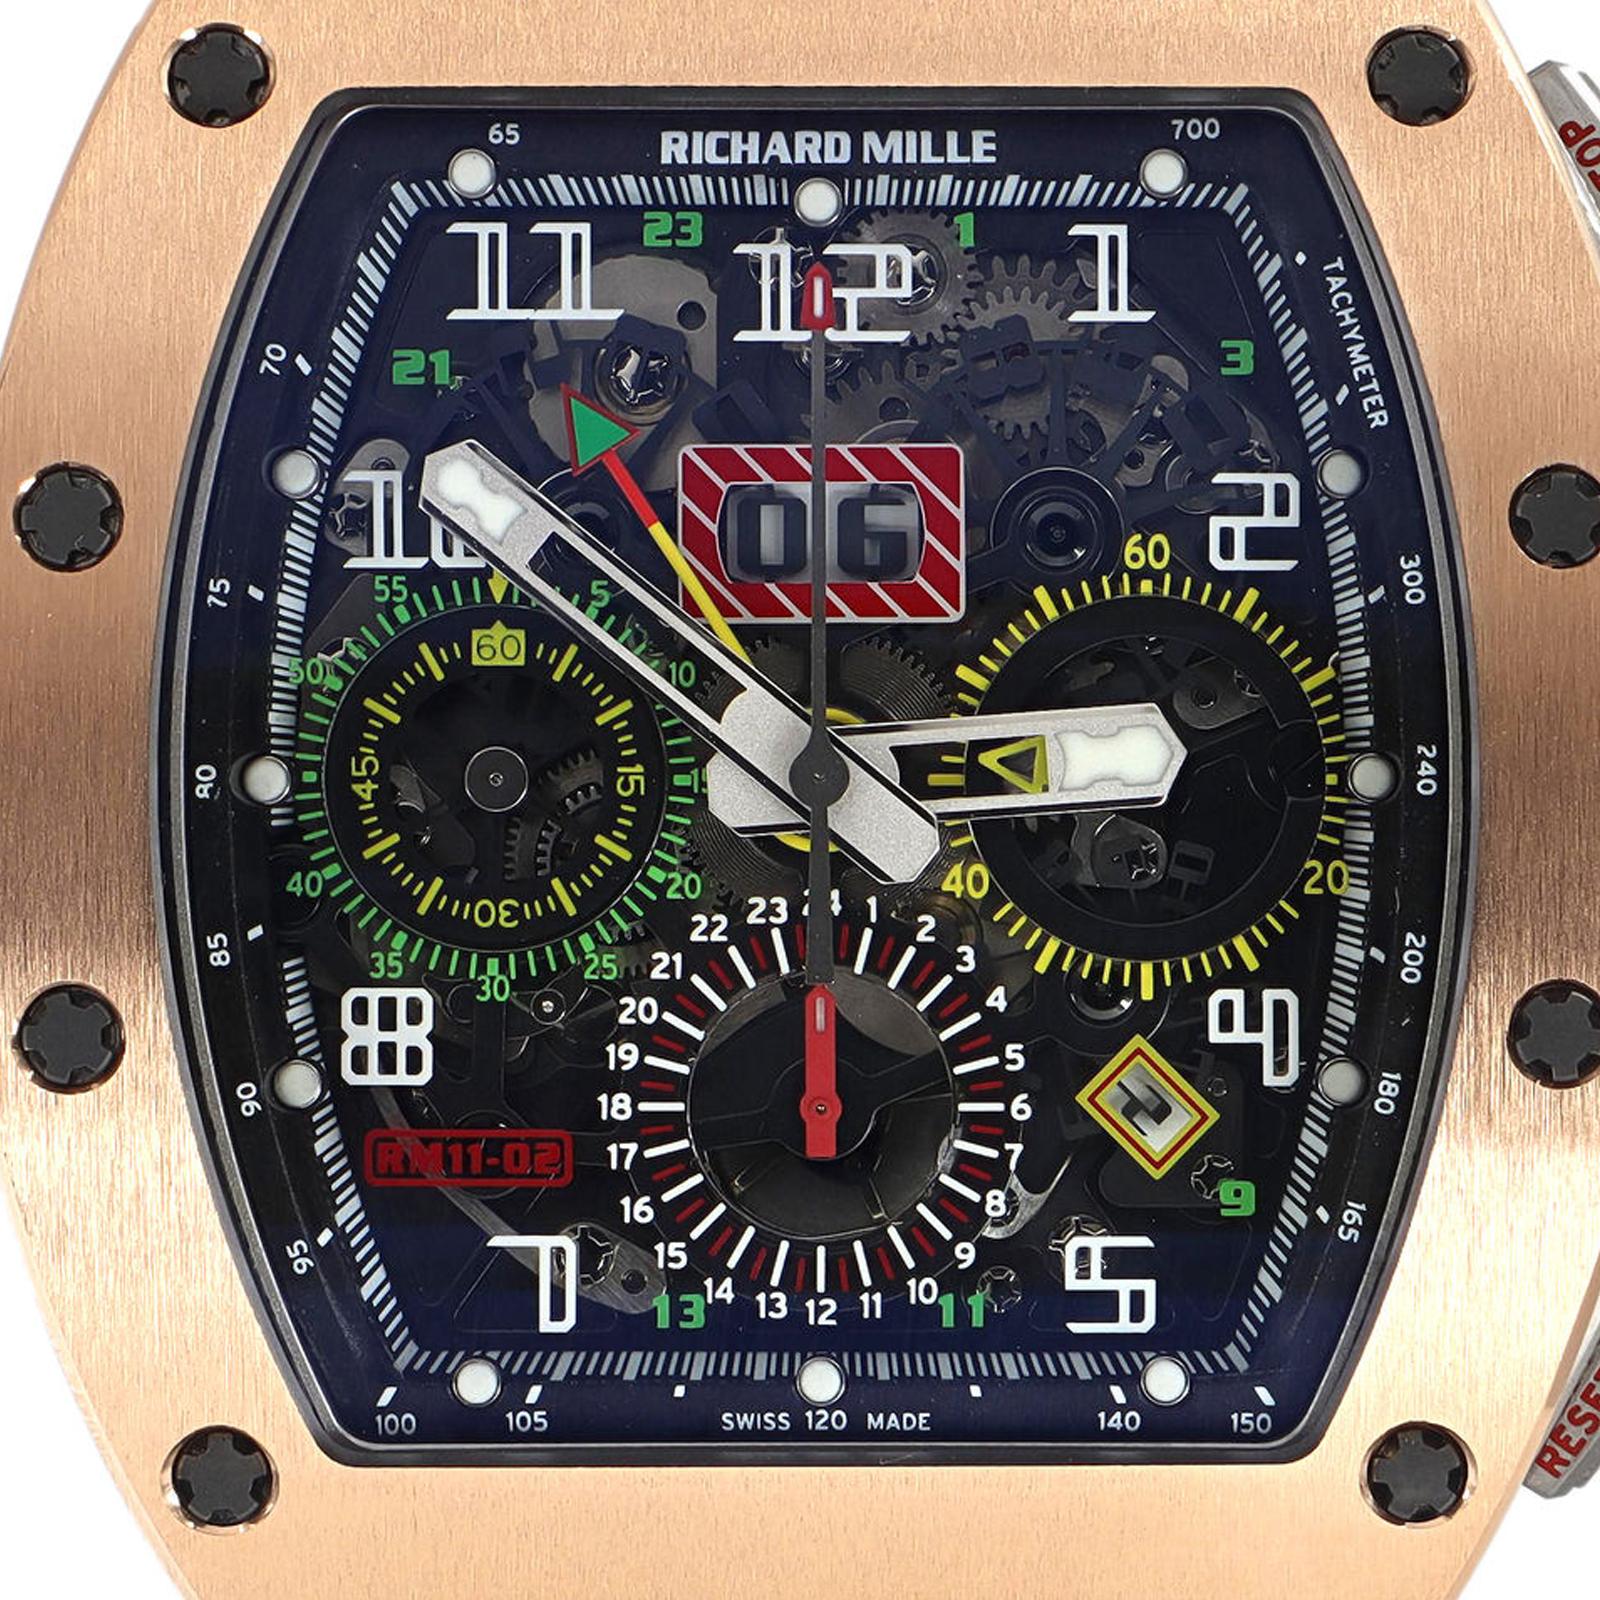 (32860)
This pre-owned Richard Mille RM 11-02 is a beautiful men's timepiece that is powered by an automatic movement which is cased in a titanium case. It has a tonneau shape face, chronograph, date, small seconds sub-dial, tachymeter dial and has